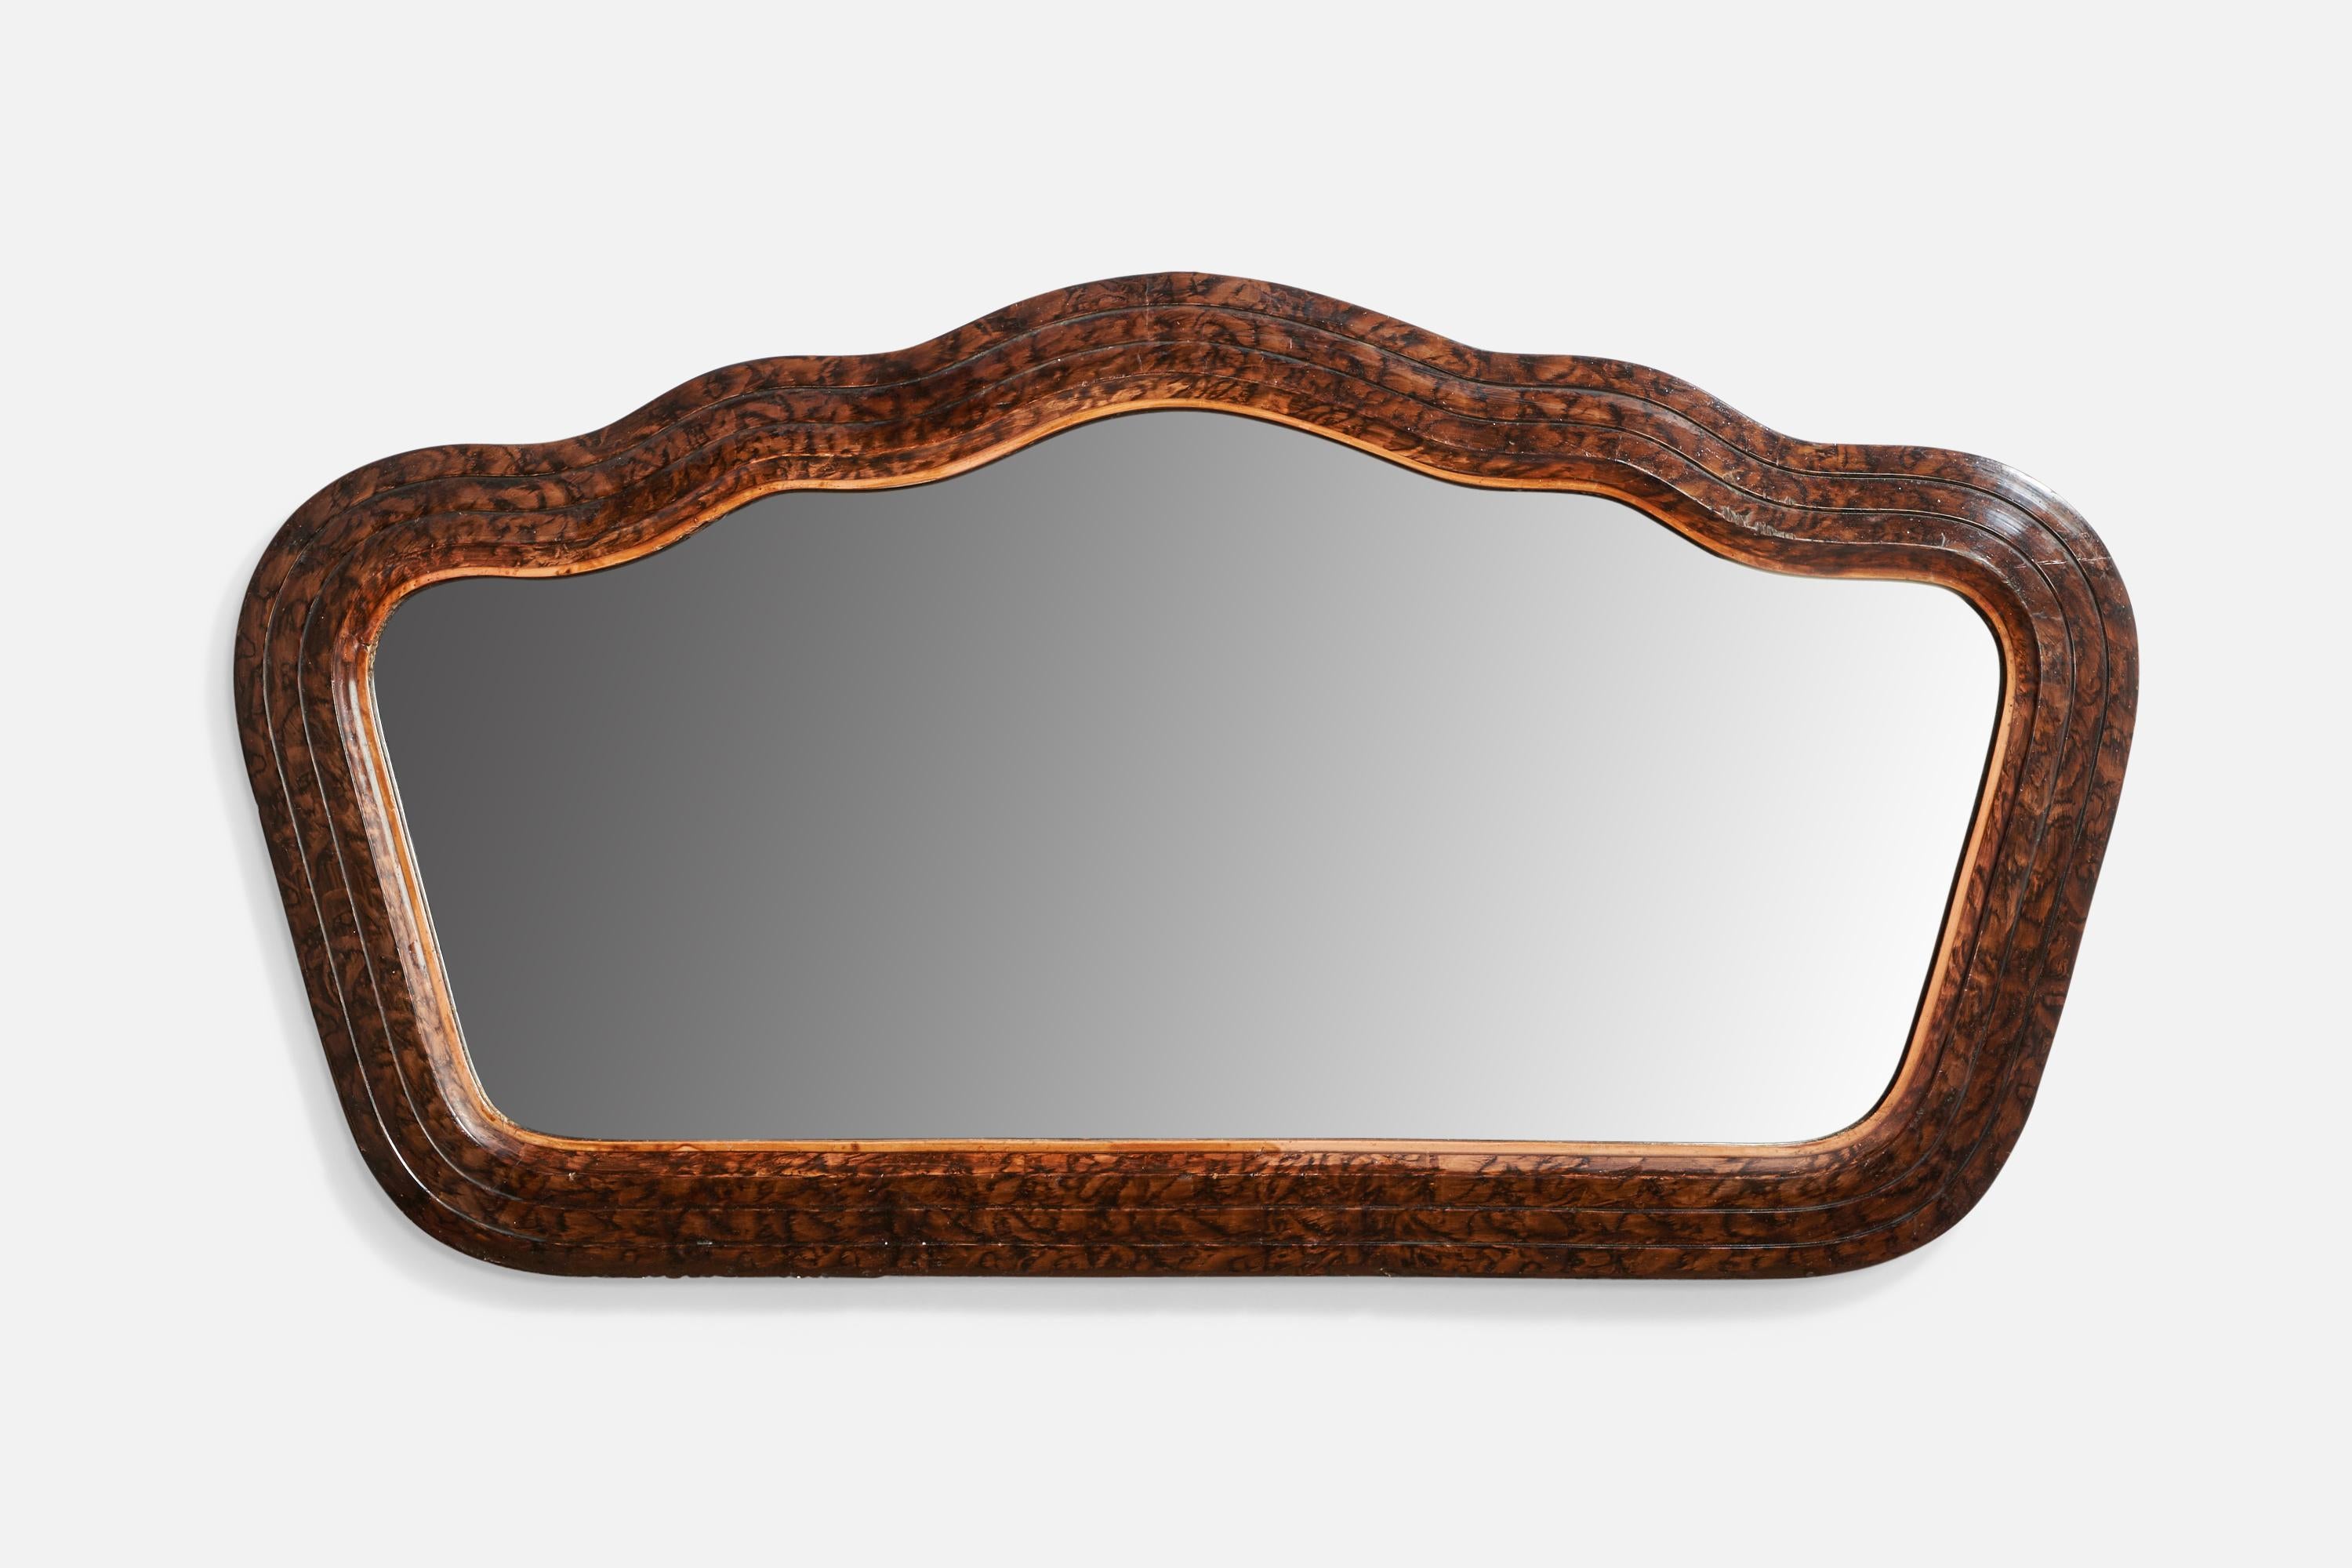 An organic dark-stained burl wood wall mirror designed and produced in Italy, c. 1930s.